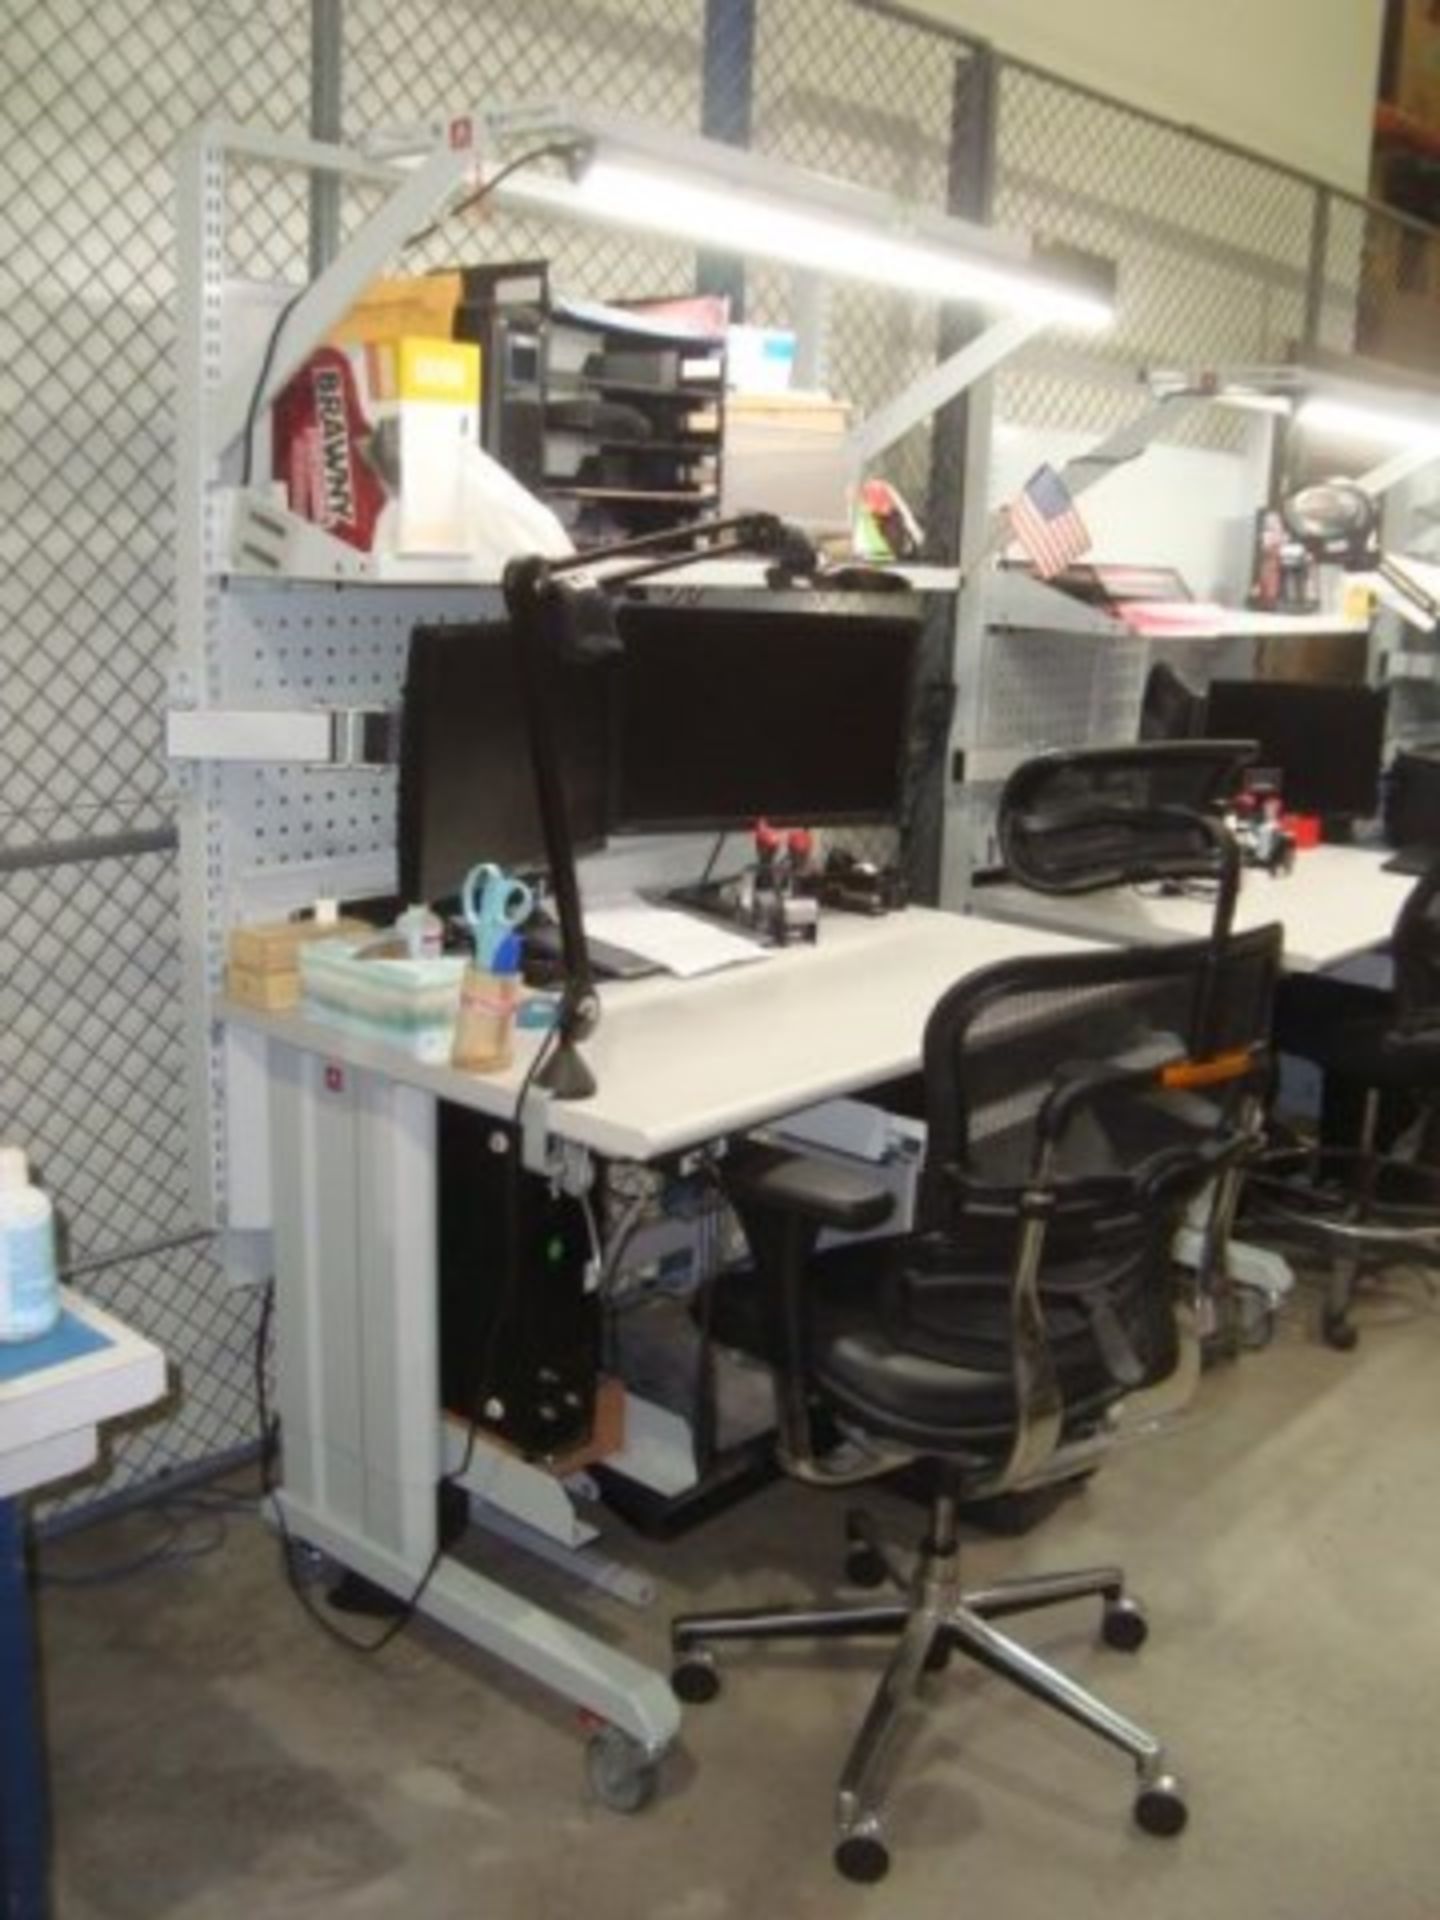 Mobile Workstation Benches & Chairs - Image 2 of 13